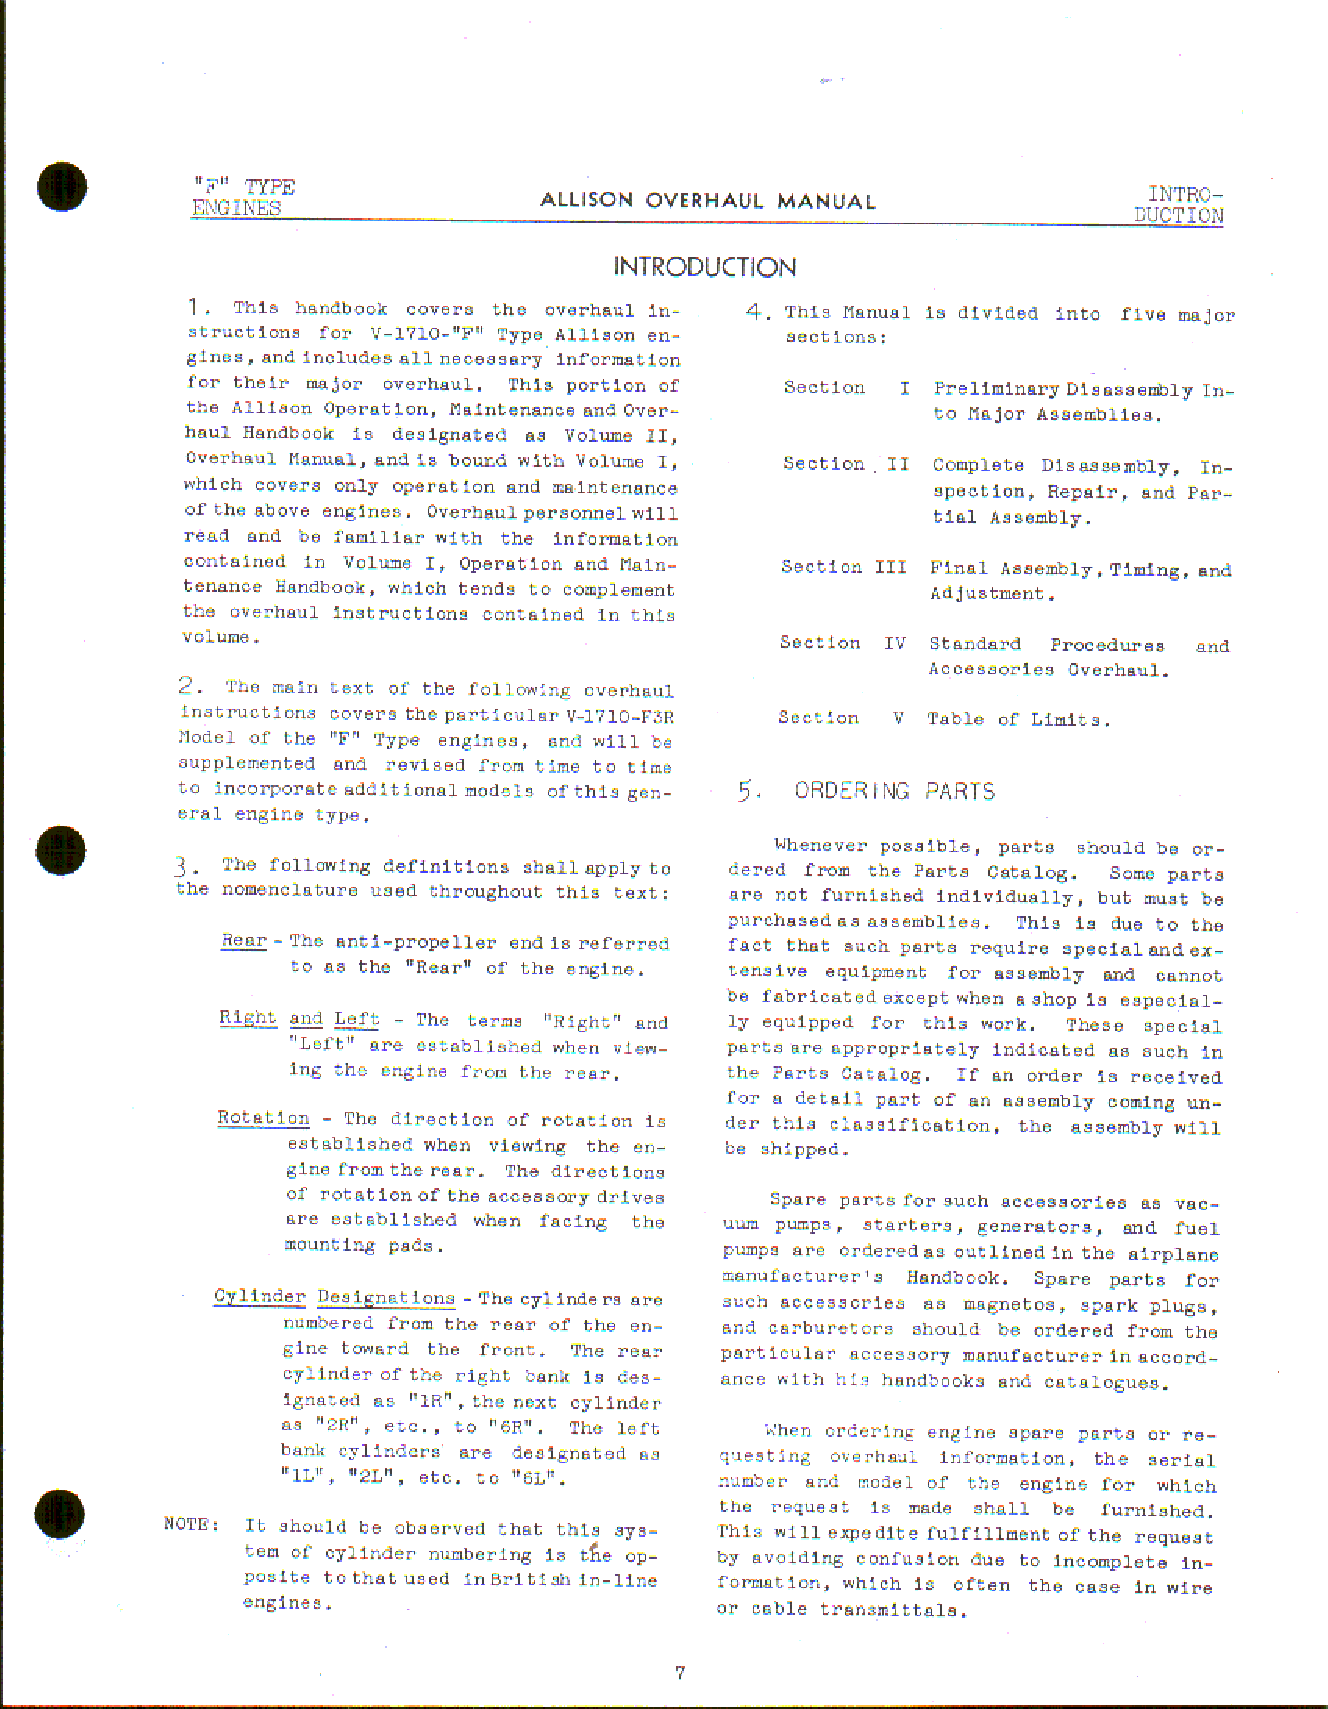 Sample page 80 from AirCorps Library document: Operation Maintenance & Overhaul Handbook - Allison V-1710-F Engines